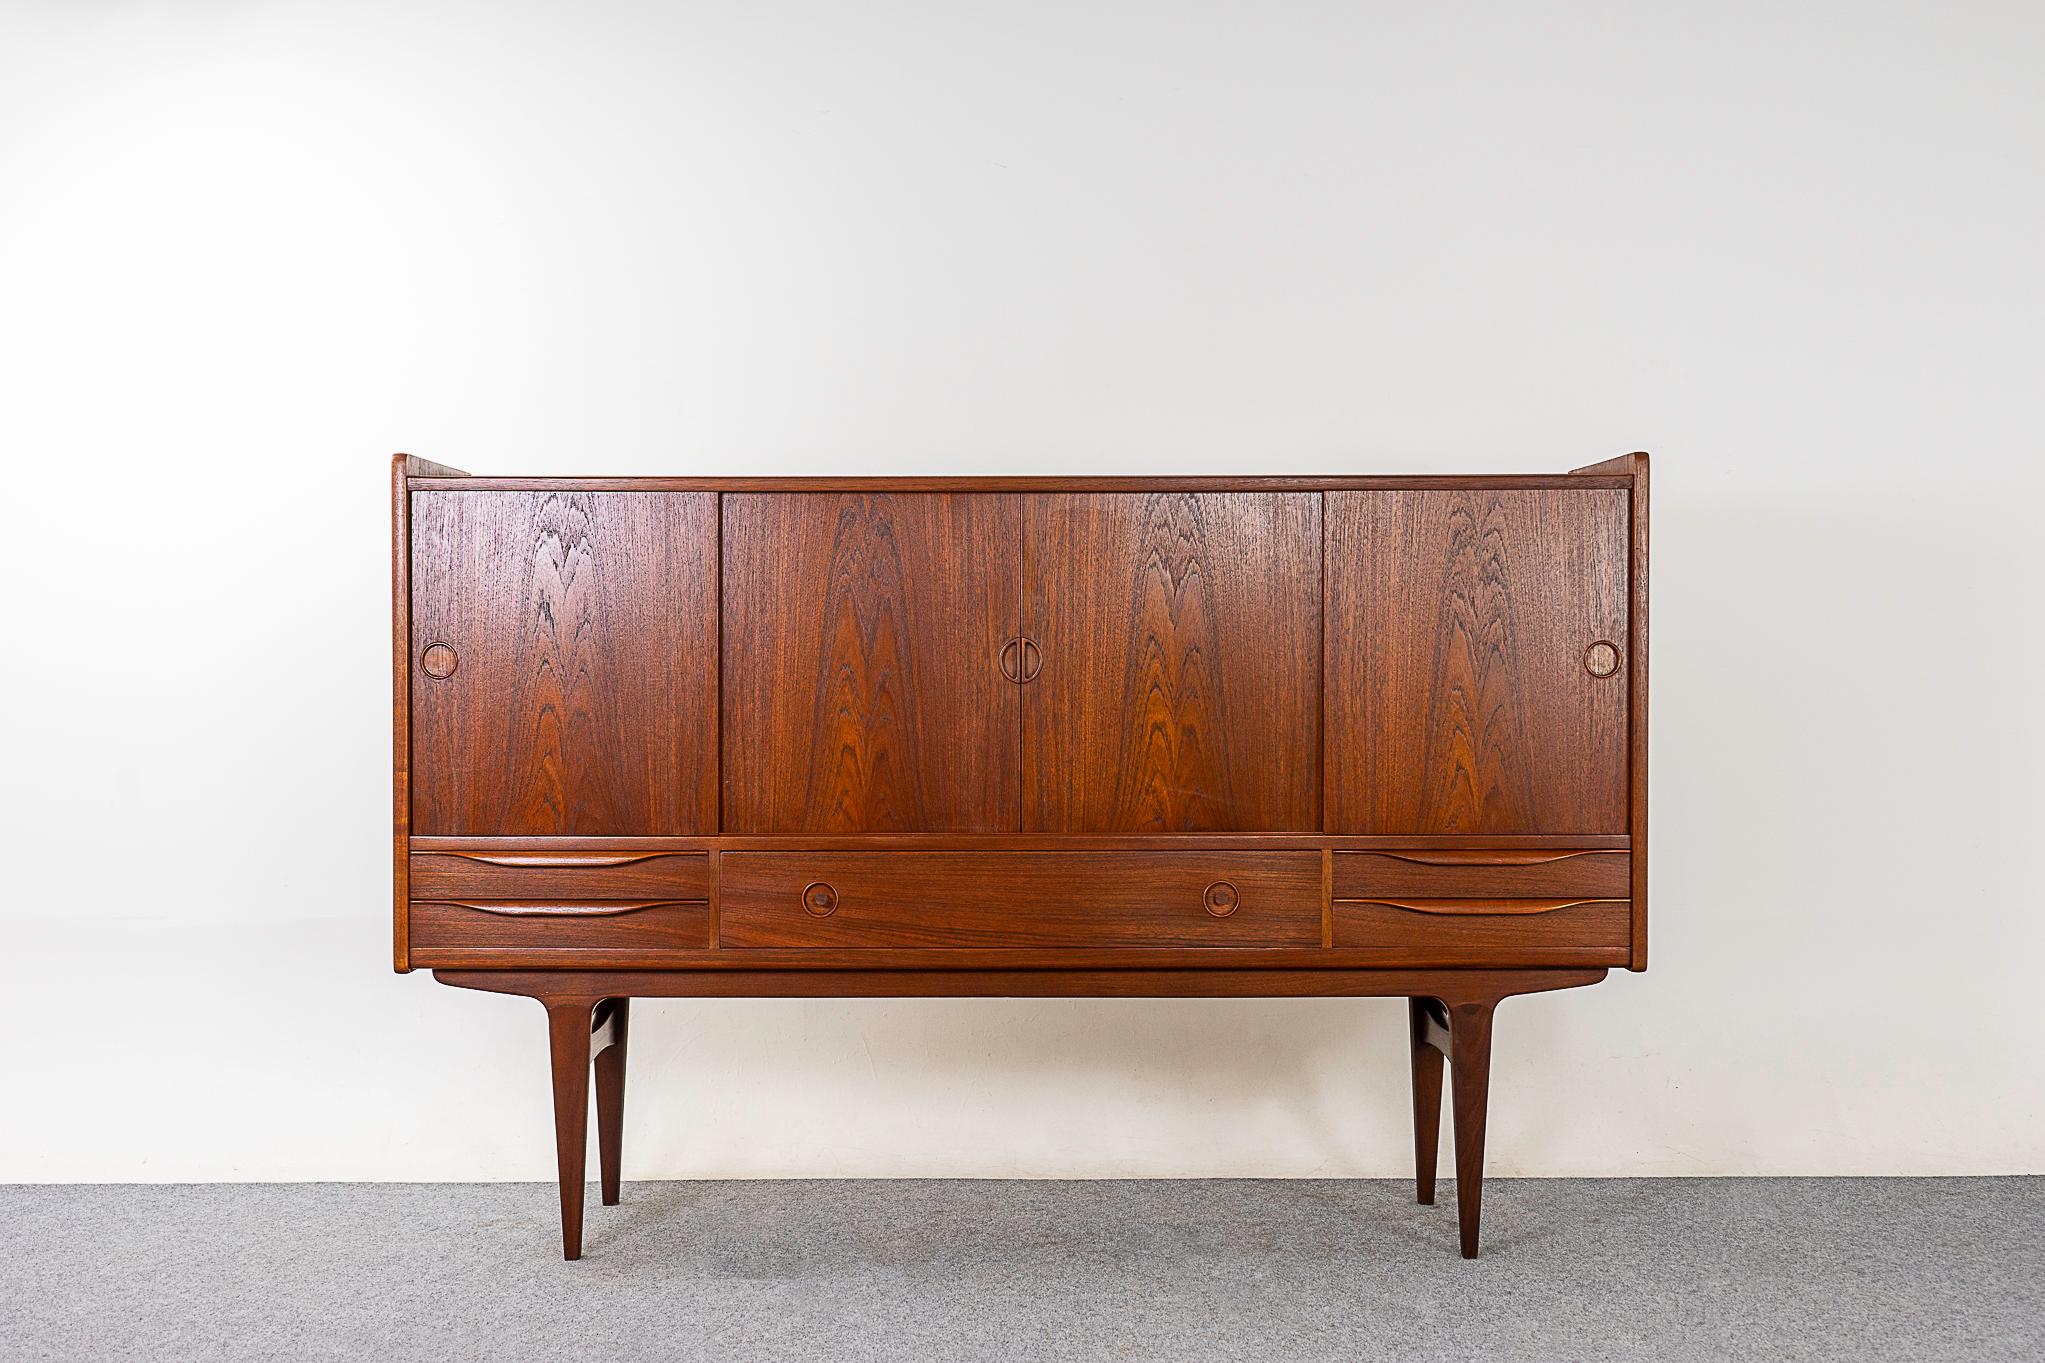 Teak Danish tall sideboard, circa 1960's. A combination of sliding doors and exterior drawers, ample storage for a variety of uses! Interior compartments showcase adjustable shelving and felt lined sleek dovetailed flatware drawers. Clean, simple